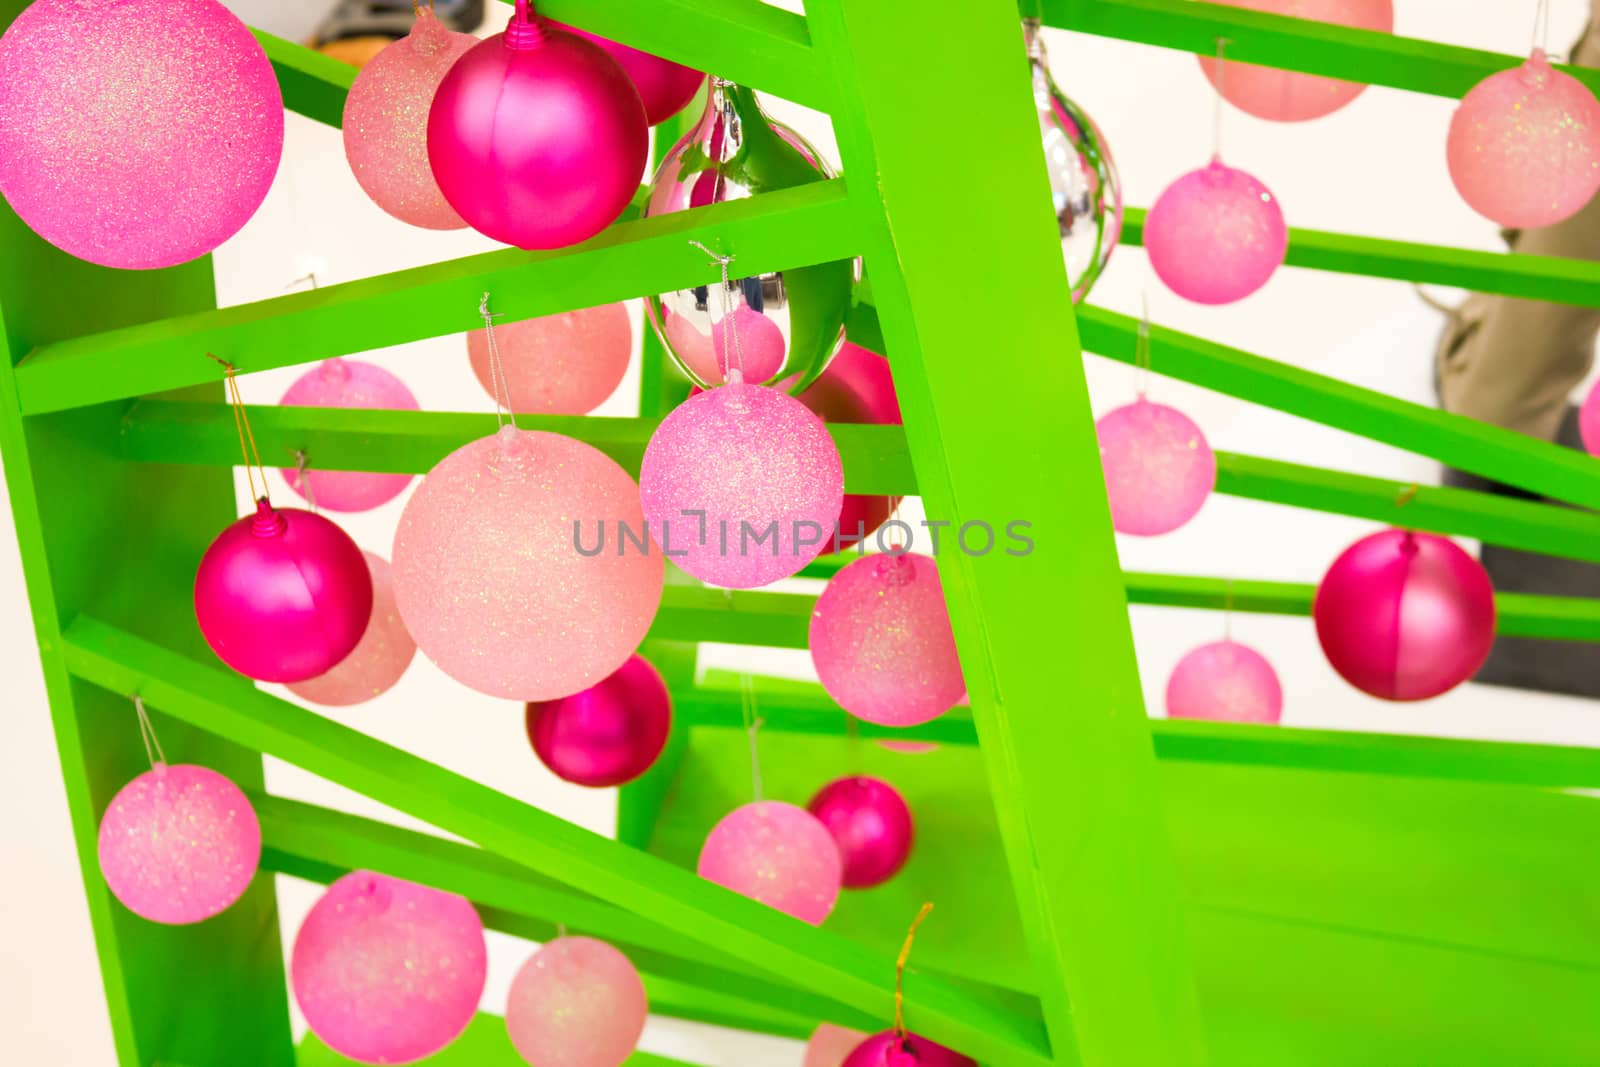 the Christmas object color symbol background photography